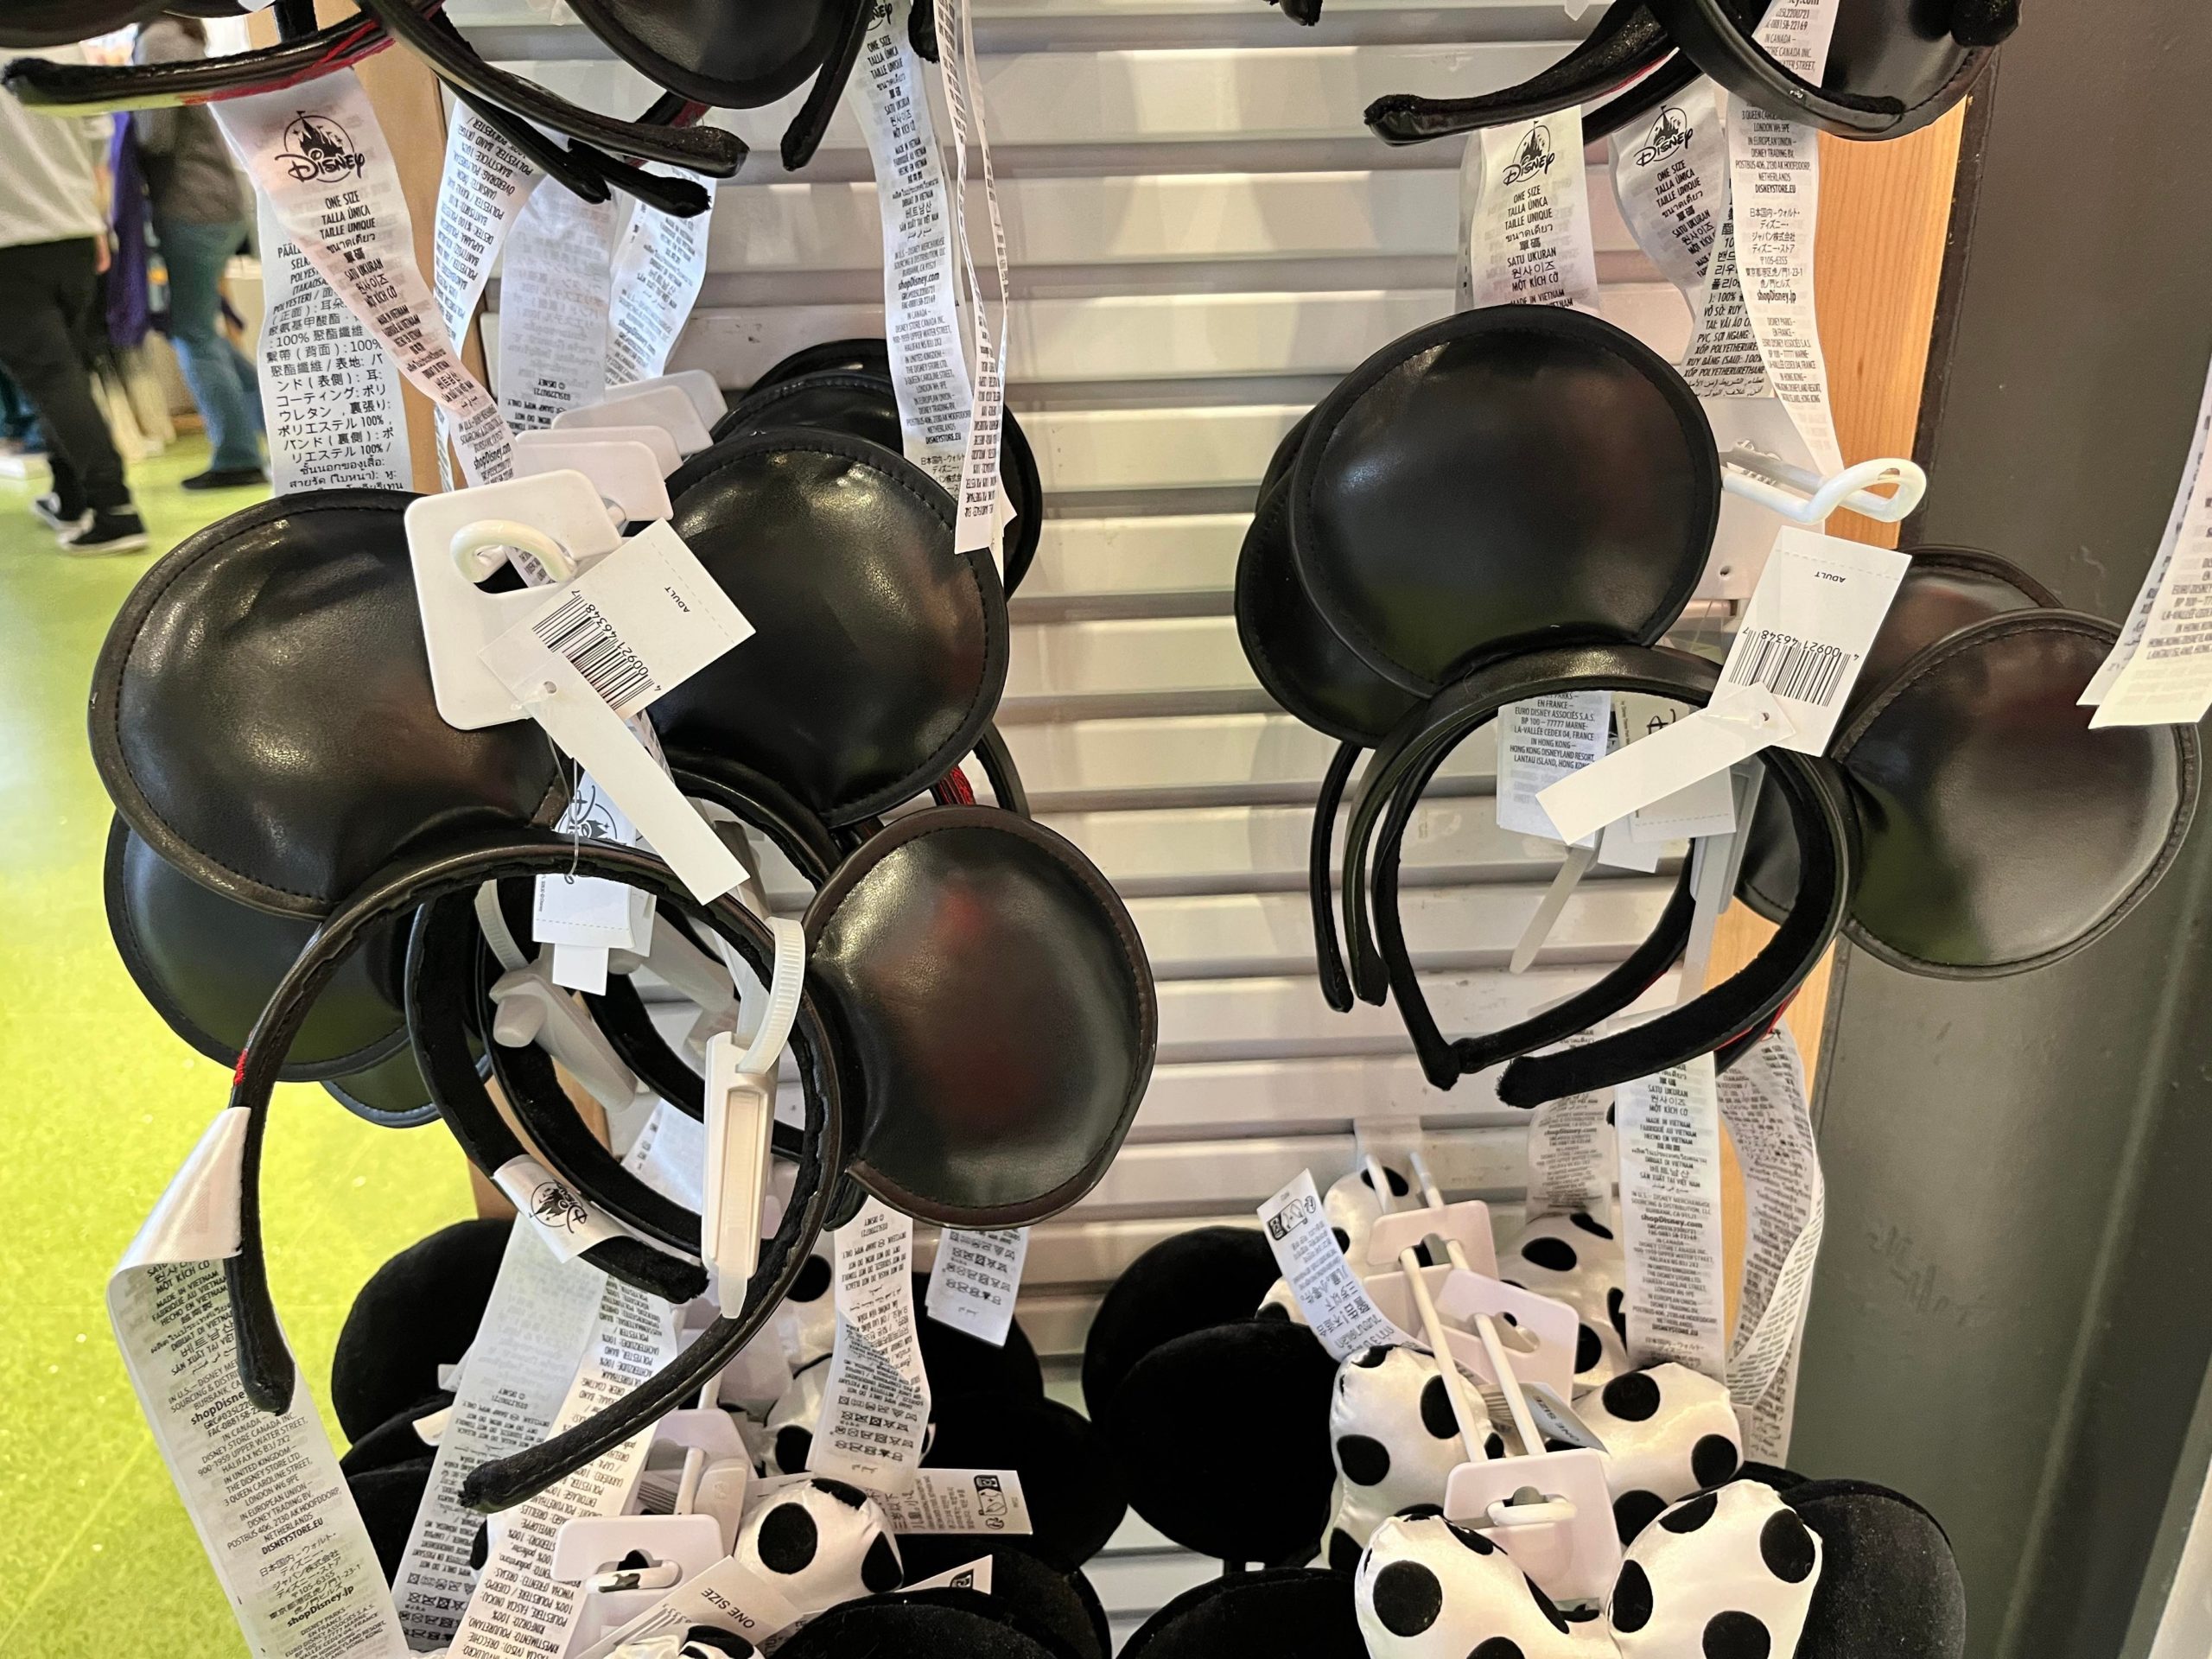 150K Followers - Epic Mickey Ears Giveaway with WDW Magazine